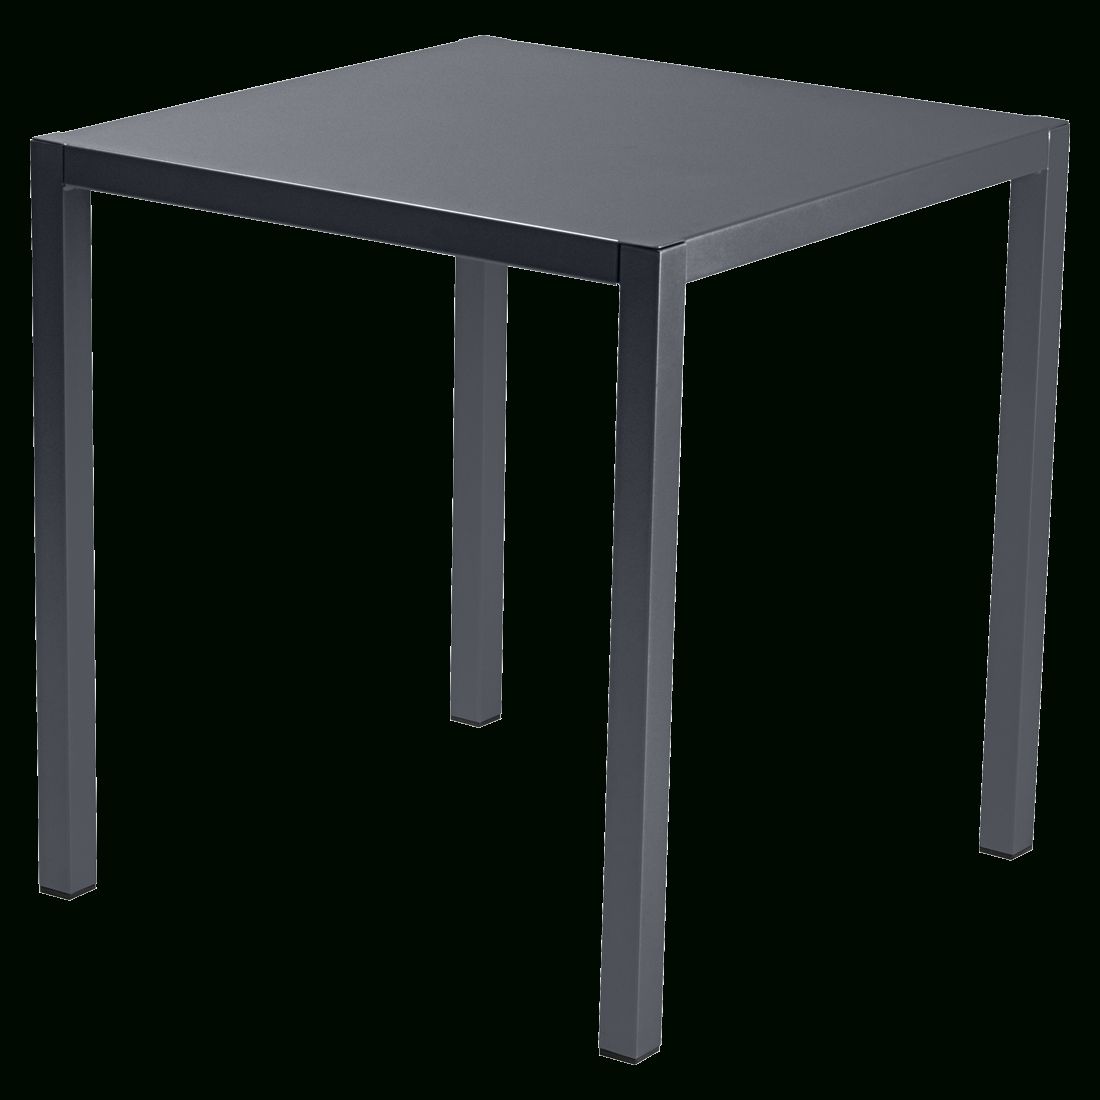 Best And Newest Table Carree Inside Out – Quatuor Within Black Square Outdoor Tables (View 10 of 15)